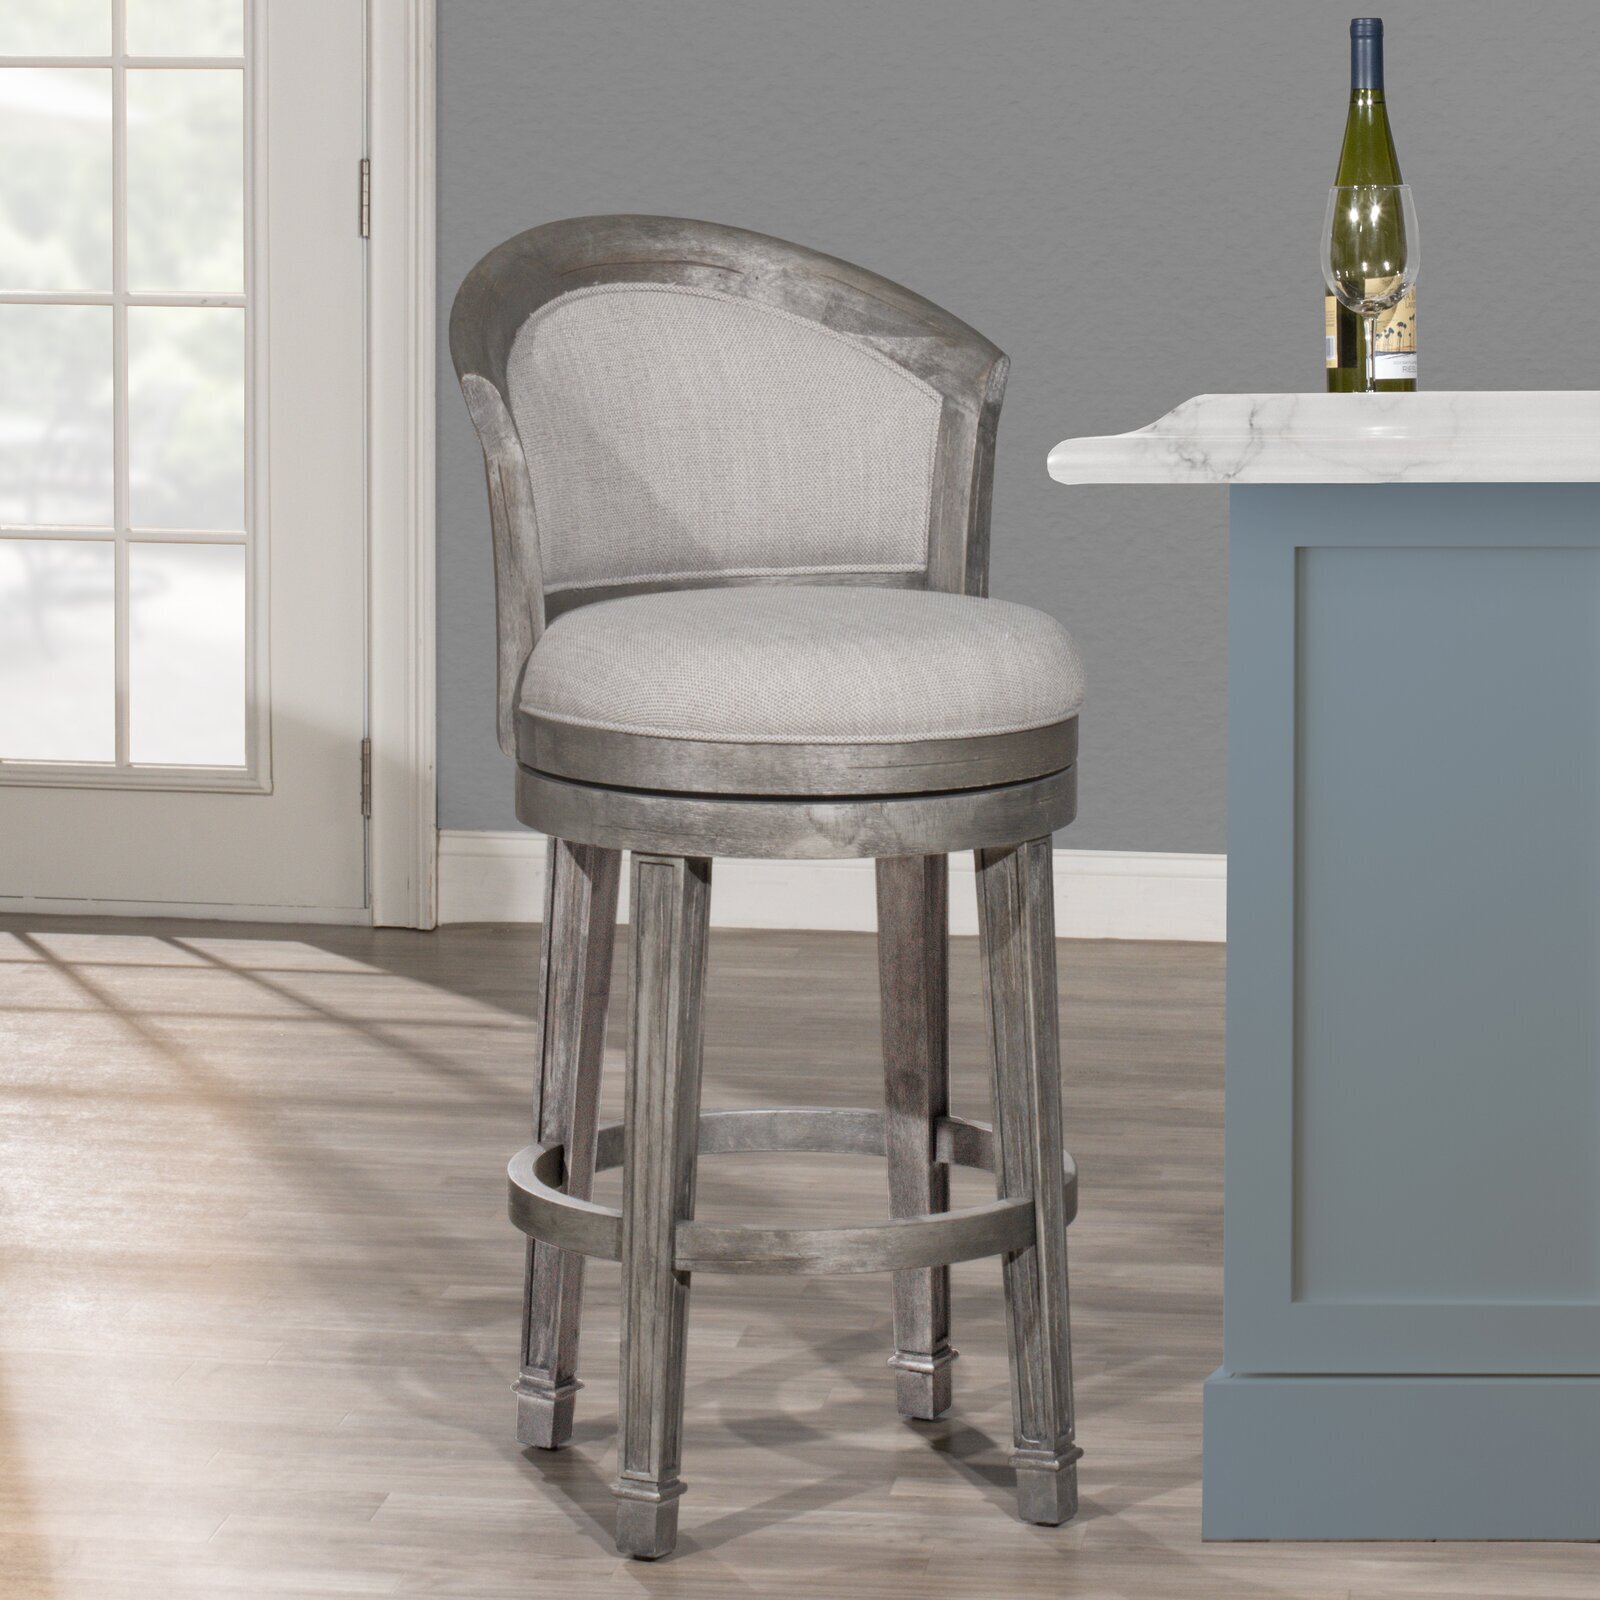 Bar Stools with Round Forms